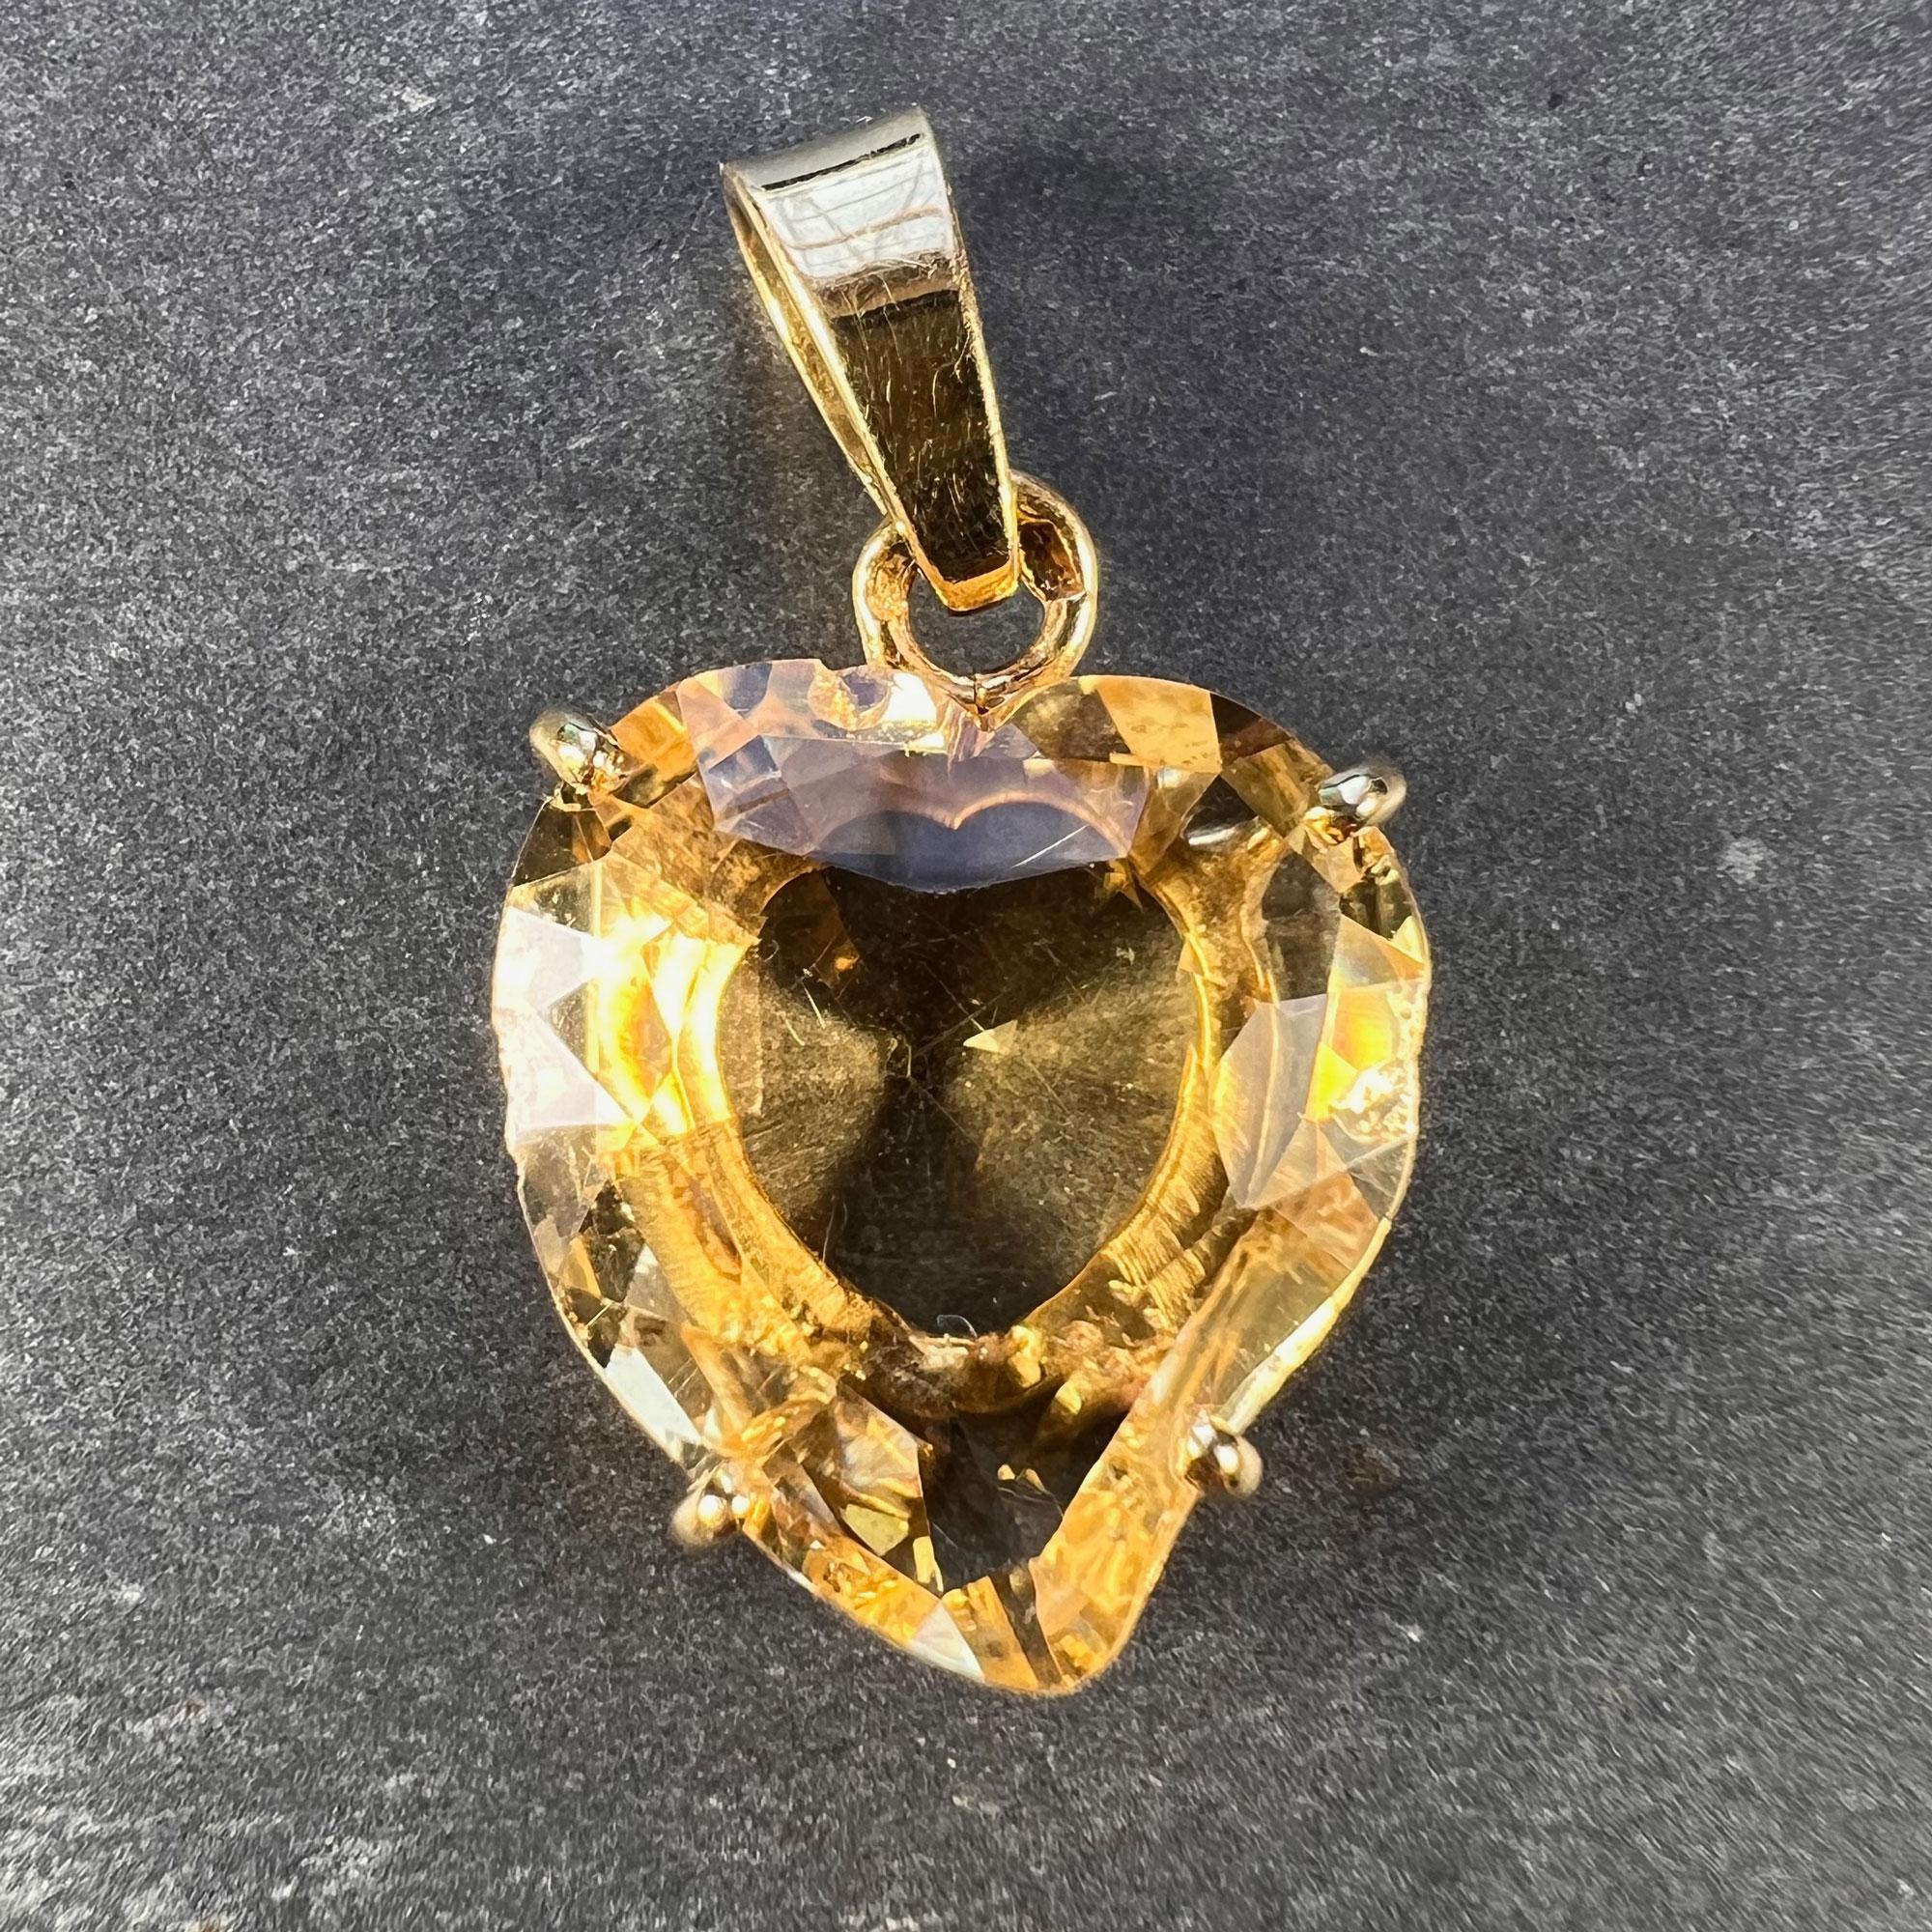 A French 18 karat (18K) yellow gold pendant designed as a witch's heart set with a citrine weighing approximately 7 carats. Witch's hearts are supposed to grant protection against ill-meaning spirits and witches. Stamped with the eagle's head for 18